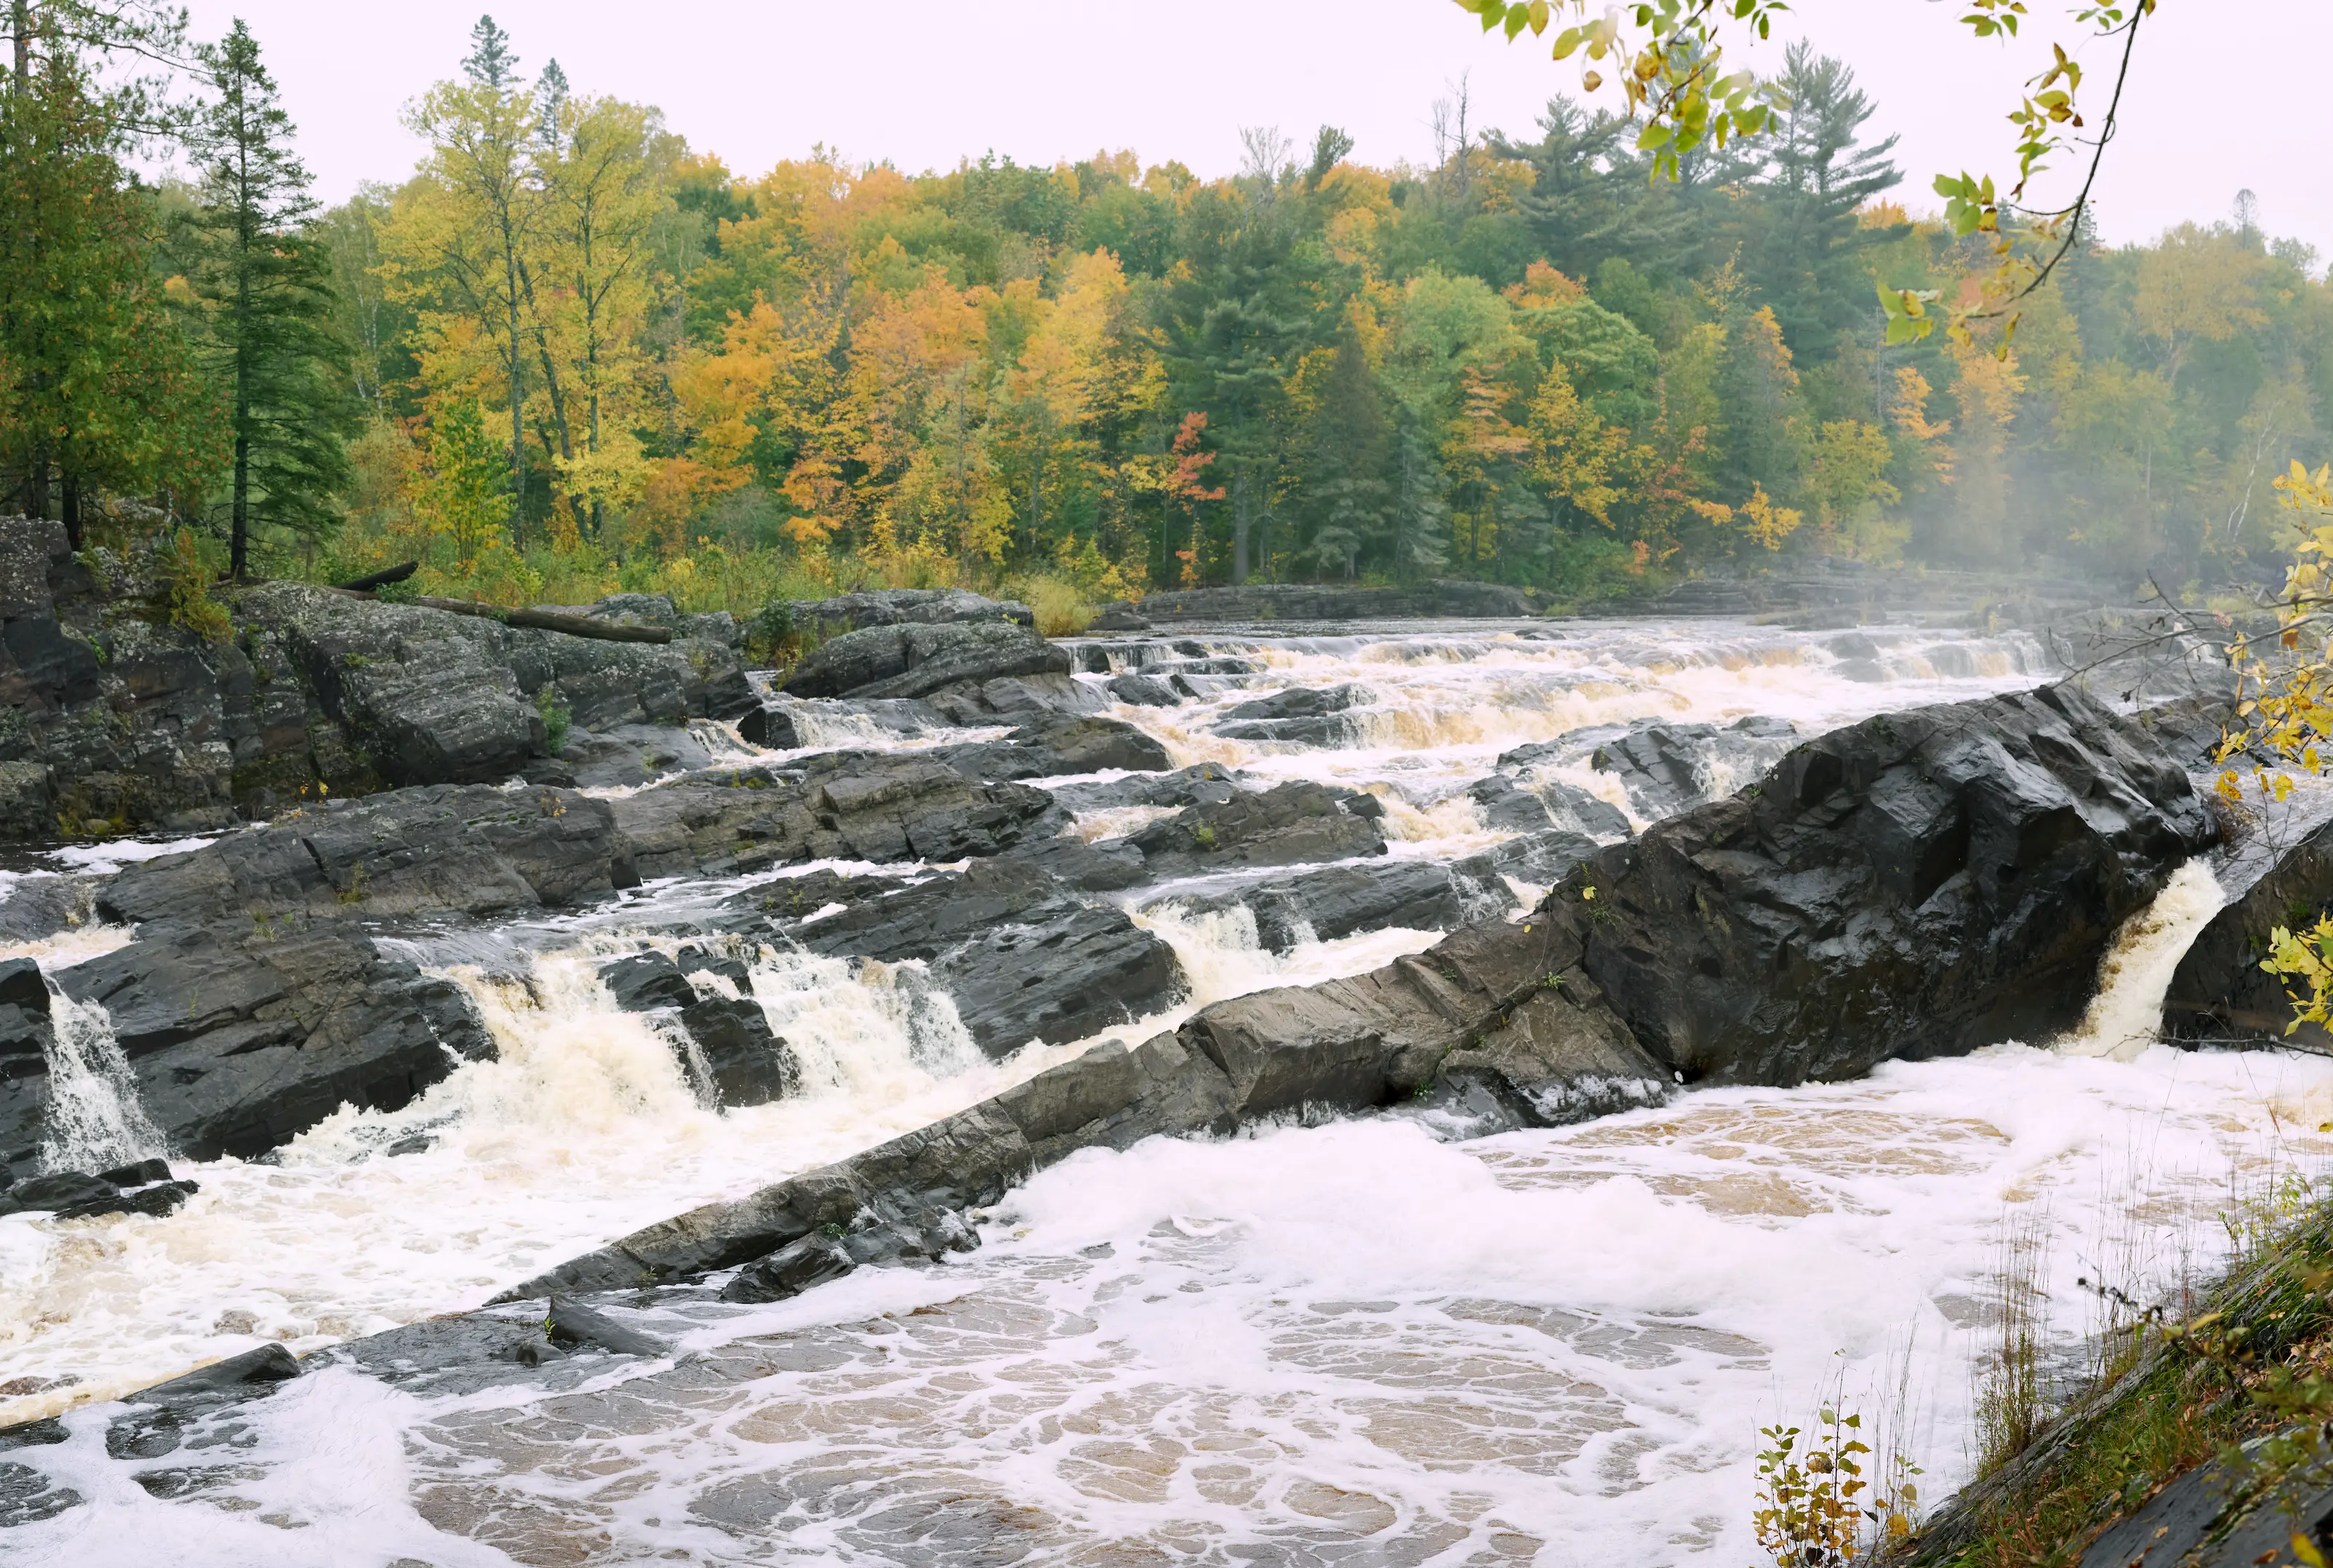 Dozens of small waterfalls crest over black rocks in the middle of a Minnesotan landscape.